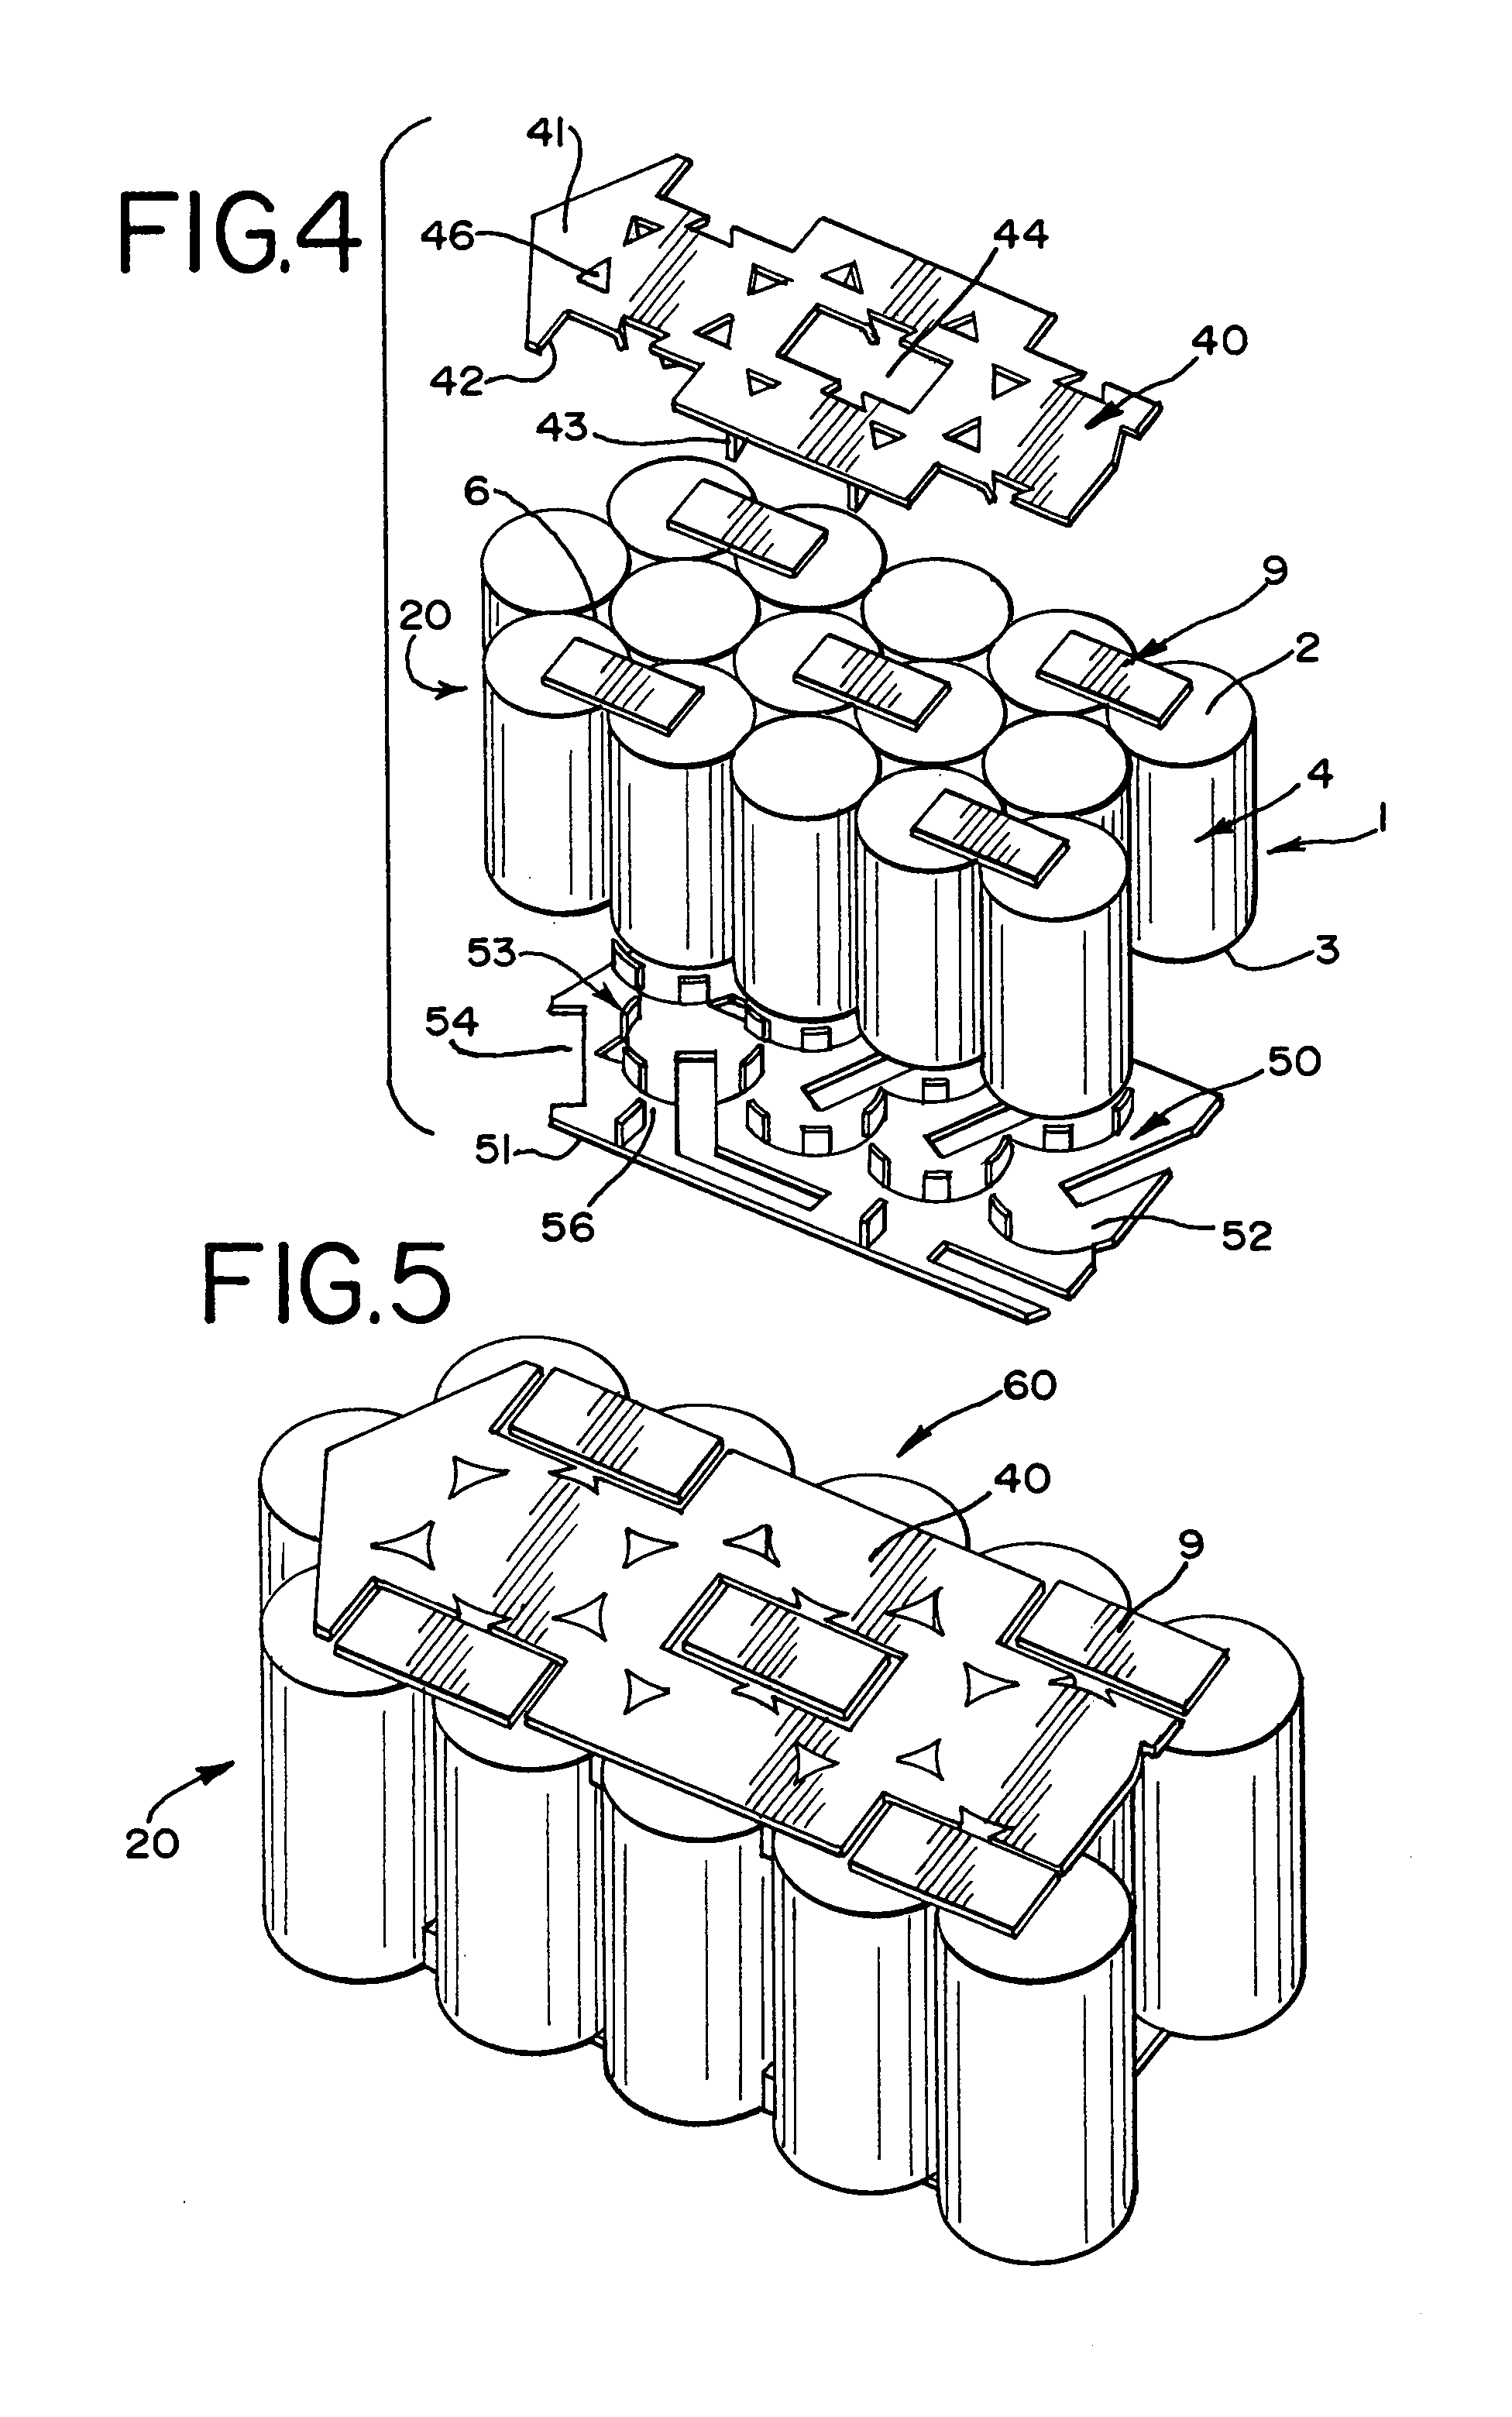 Battery venting system